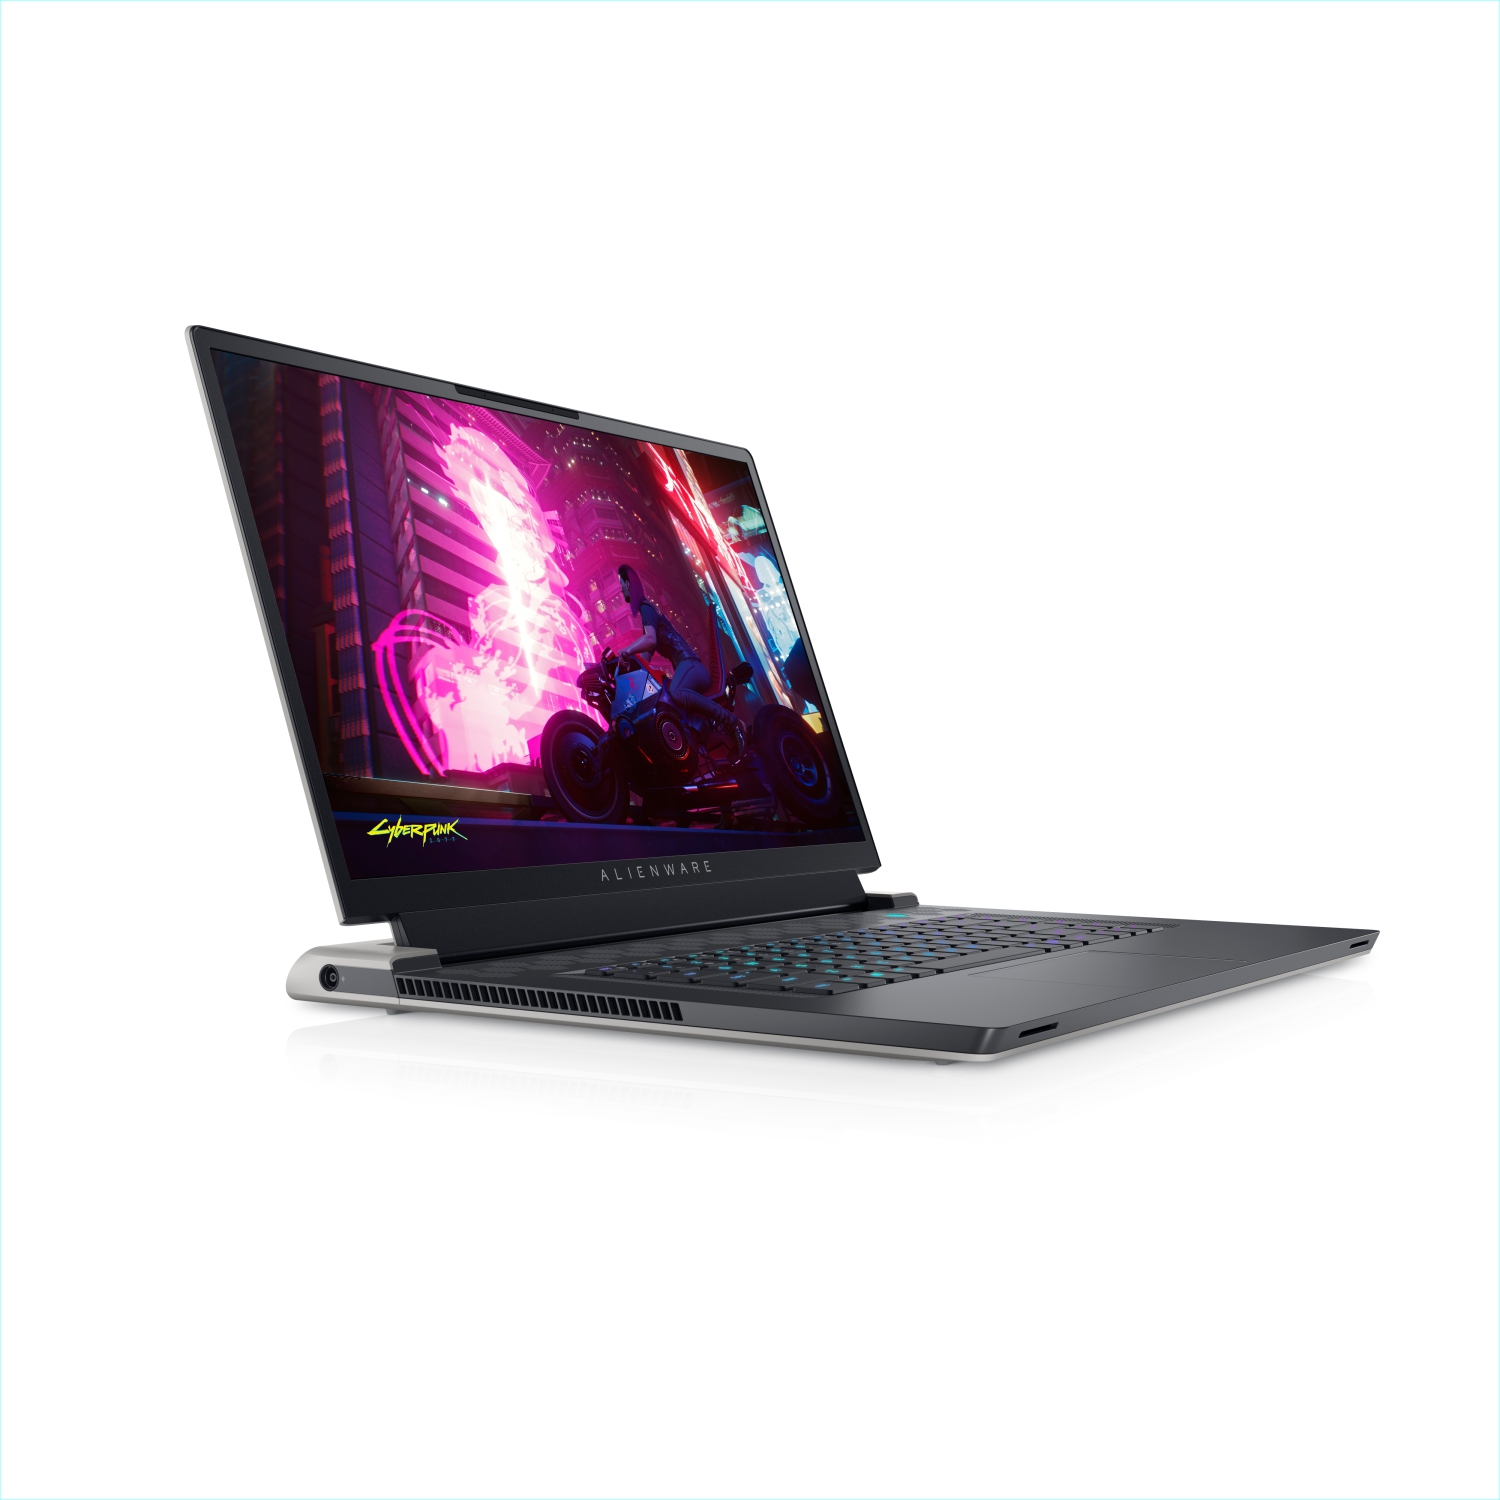 Refurbished (Excellent) - Dell Alienware X17 R1 Gaming Laptop (2021), 17.3" FHD, Core i9, 1TB SSD, 16GB RAM, RTX 3080, 8 Cores @ 5 GHz, 11th Gen CPU Certified Refurbished